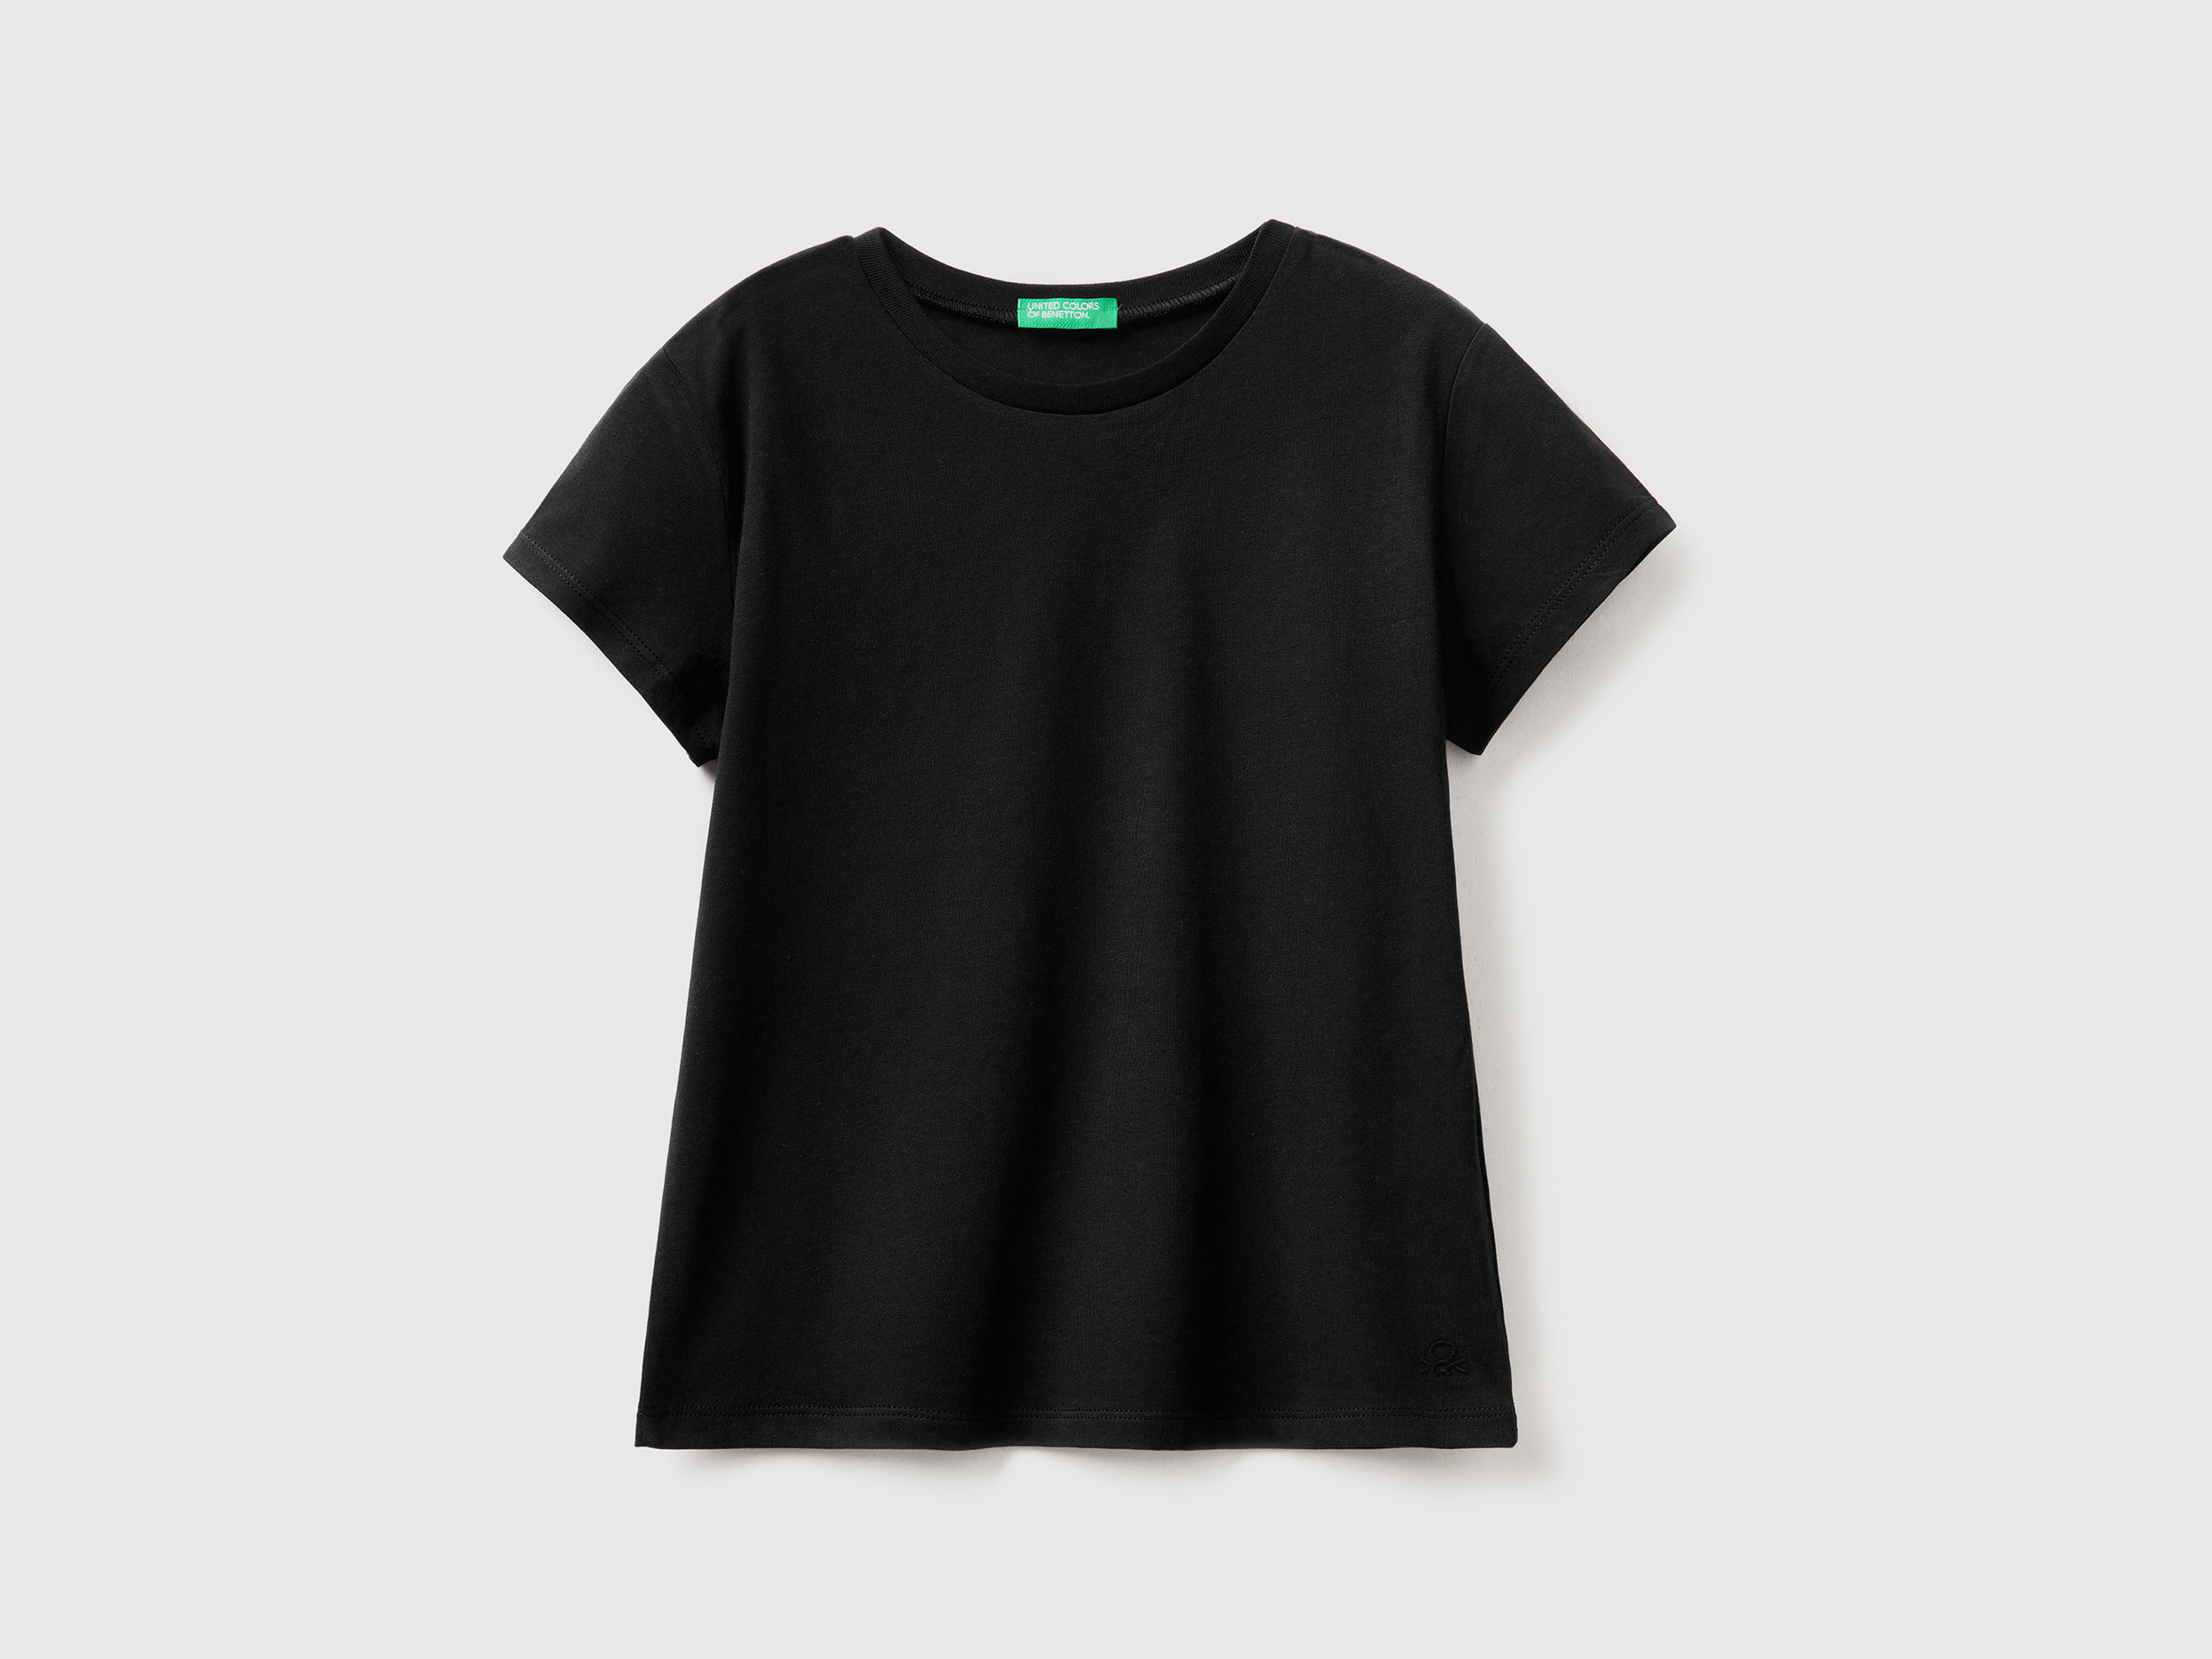 Image of Benetton, T-shirt In Pure Organic Cotton, size L, Black, Kids